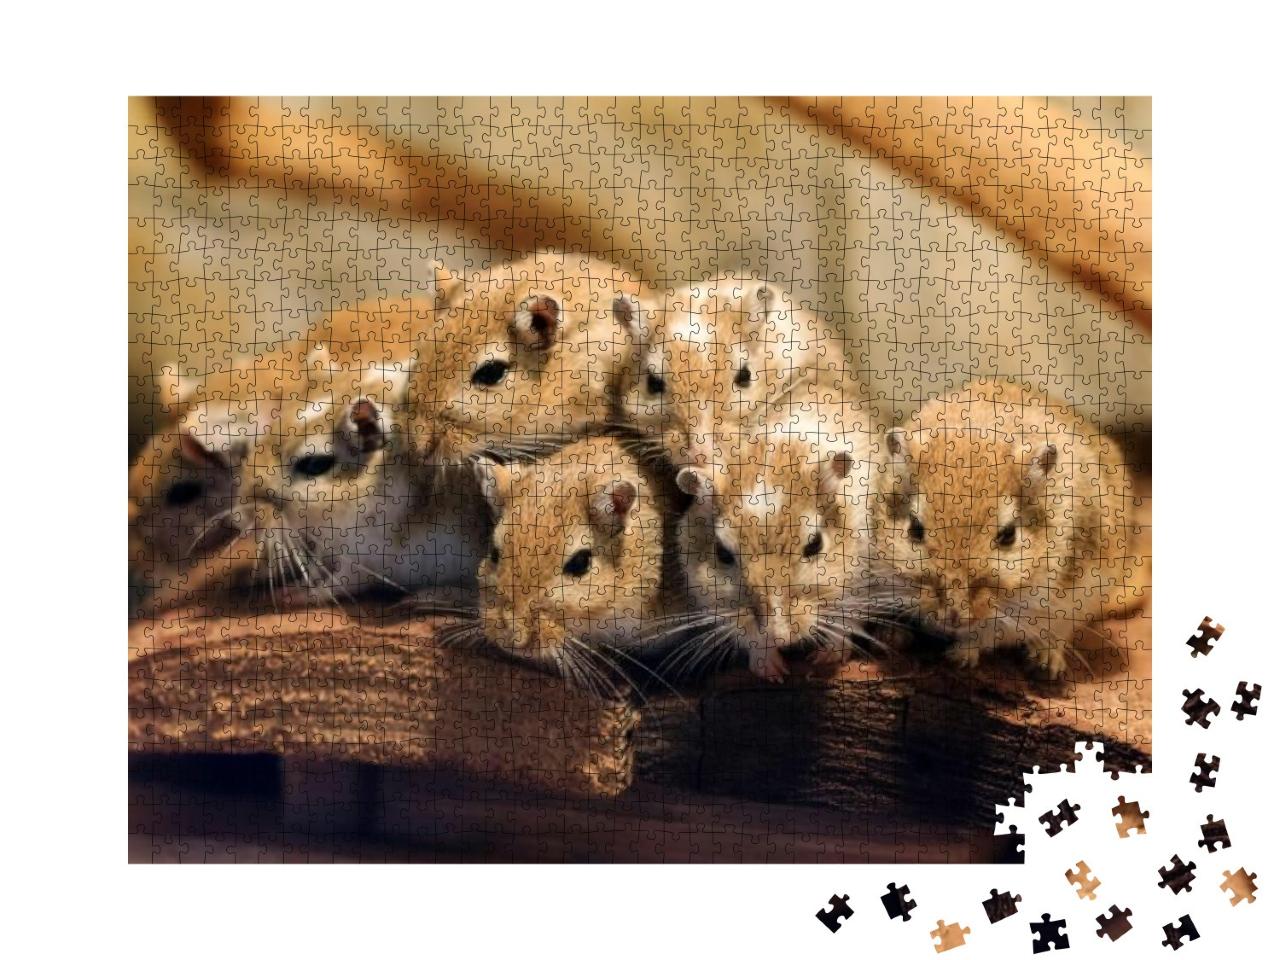 Beautiful Close Up a Cute Family of Mongolian Gerbil or M... Jigsaw Puzzle with 1000 pieces